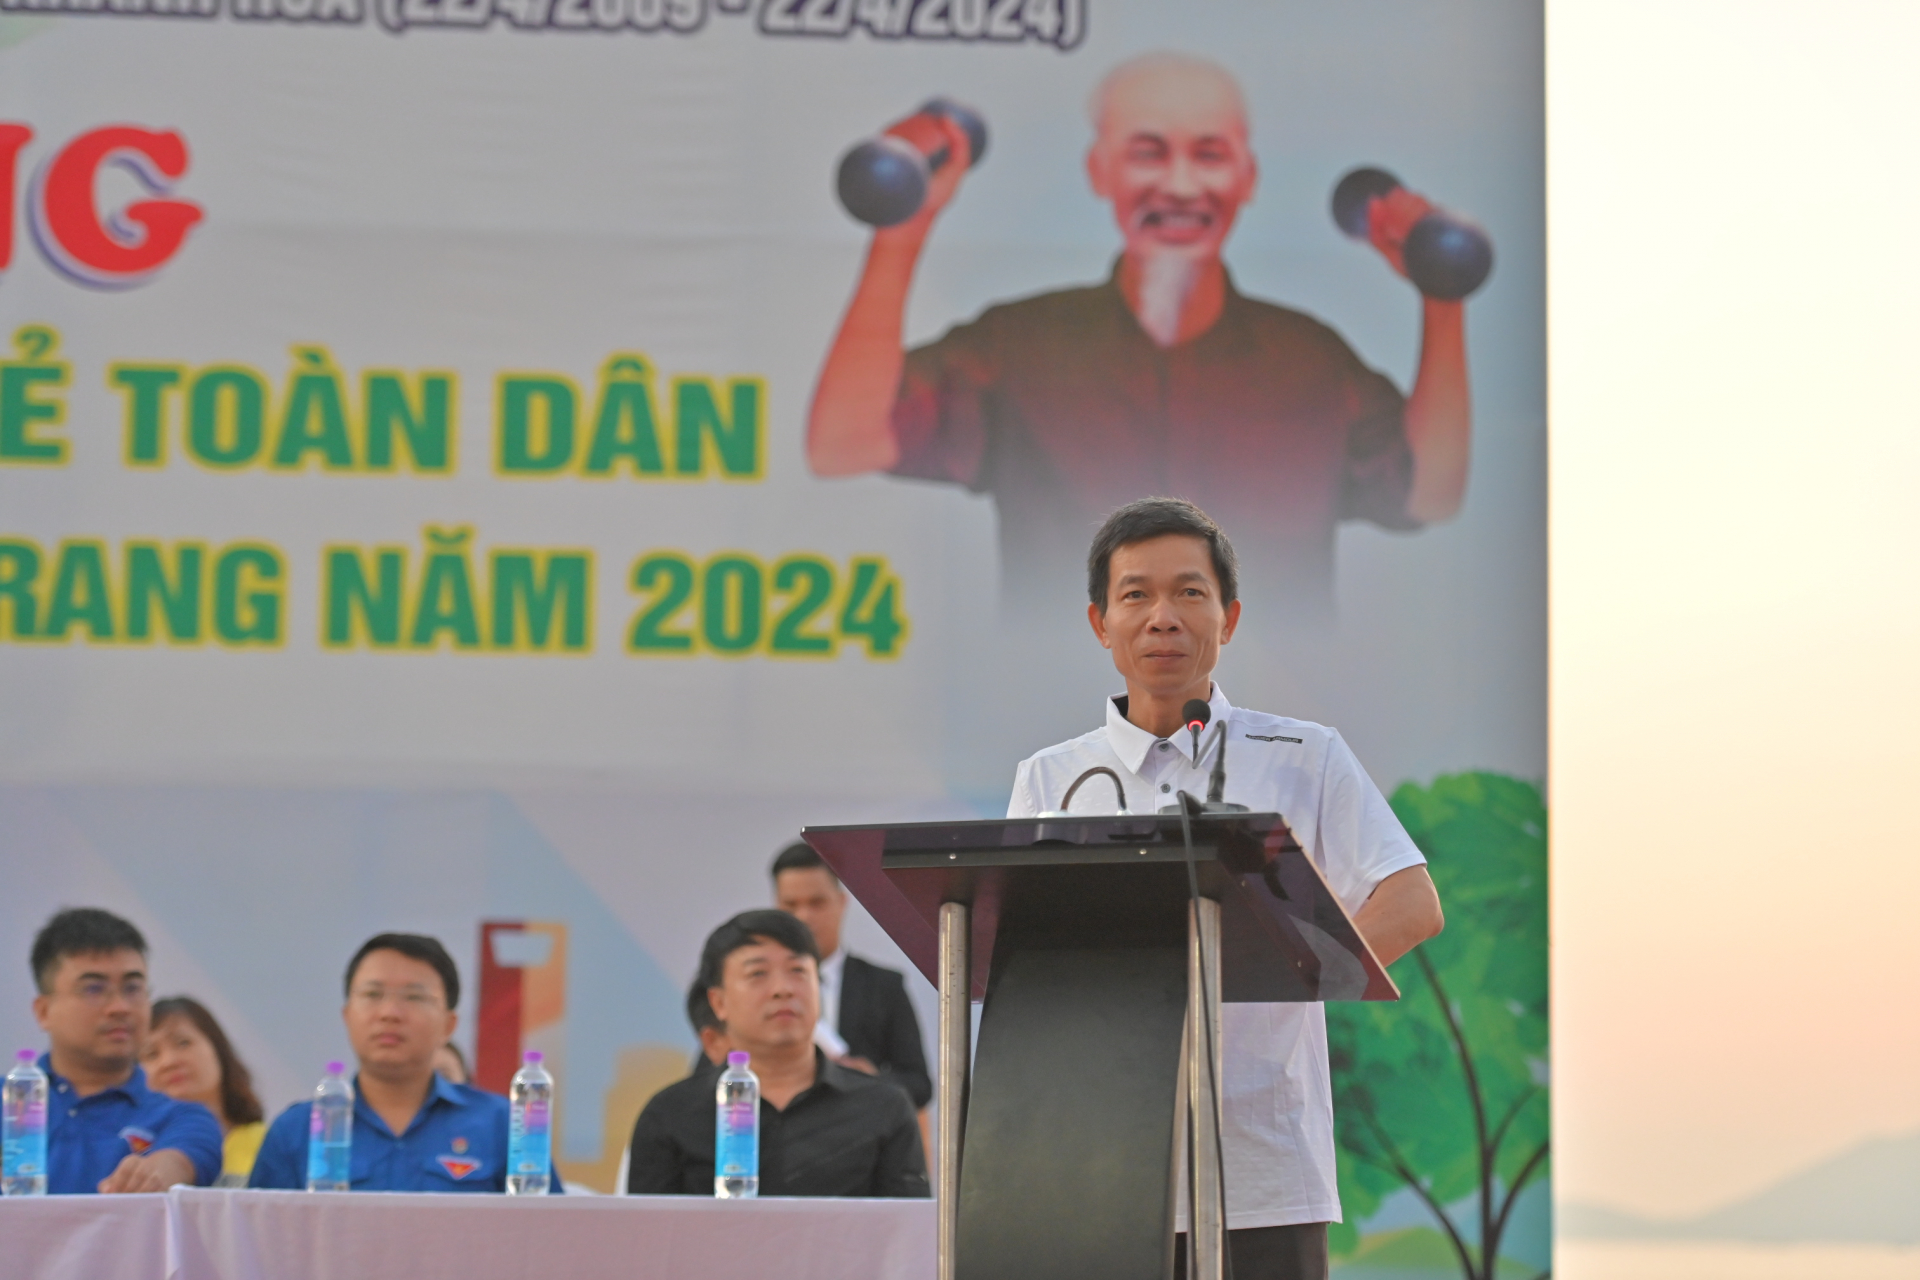 Nguyen Van Minh – Vice-Chairman of Nha Trang City Peoples Committee, encouraging people in Nha Trang City to do physical exercise and sports

